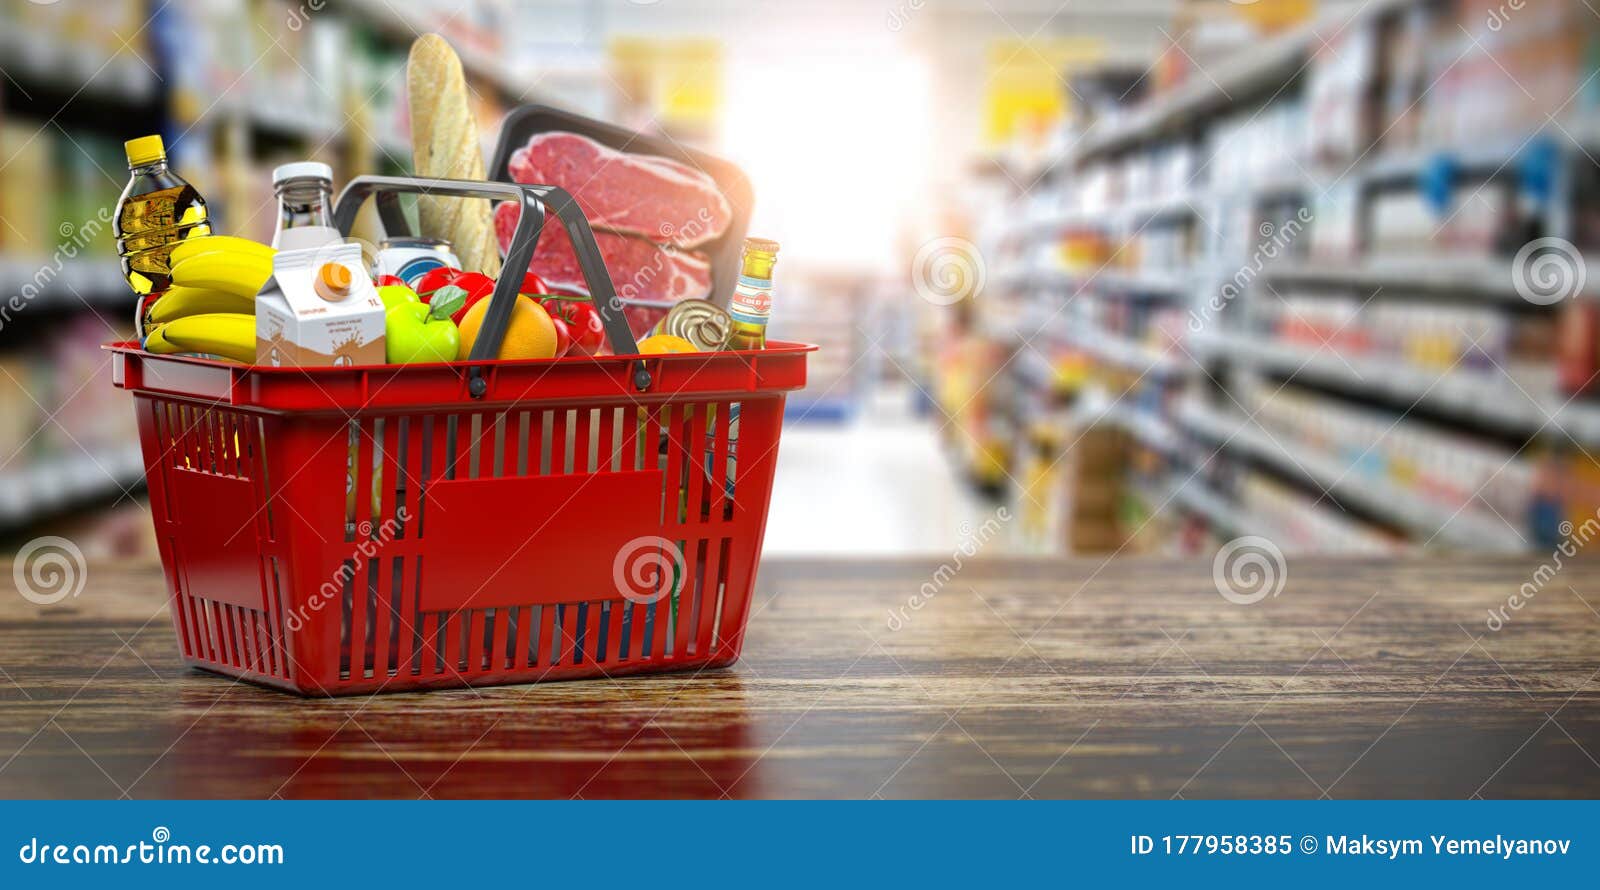 shopping basket with fresh food. grocery supermarket, food and eats online buying and delivery concept